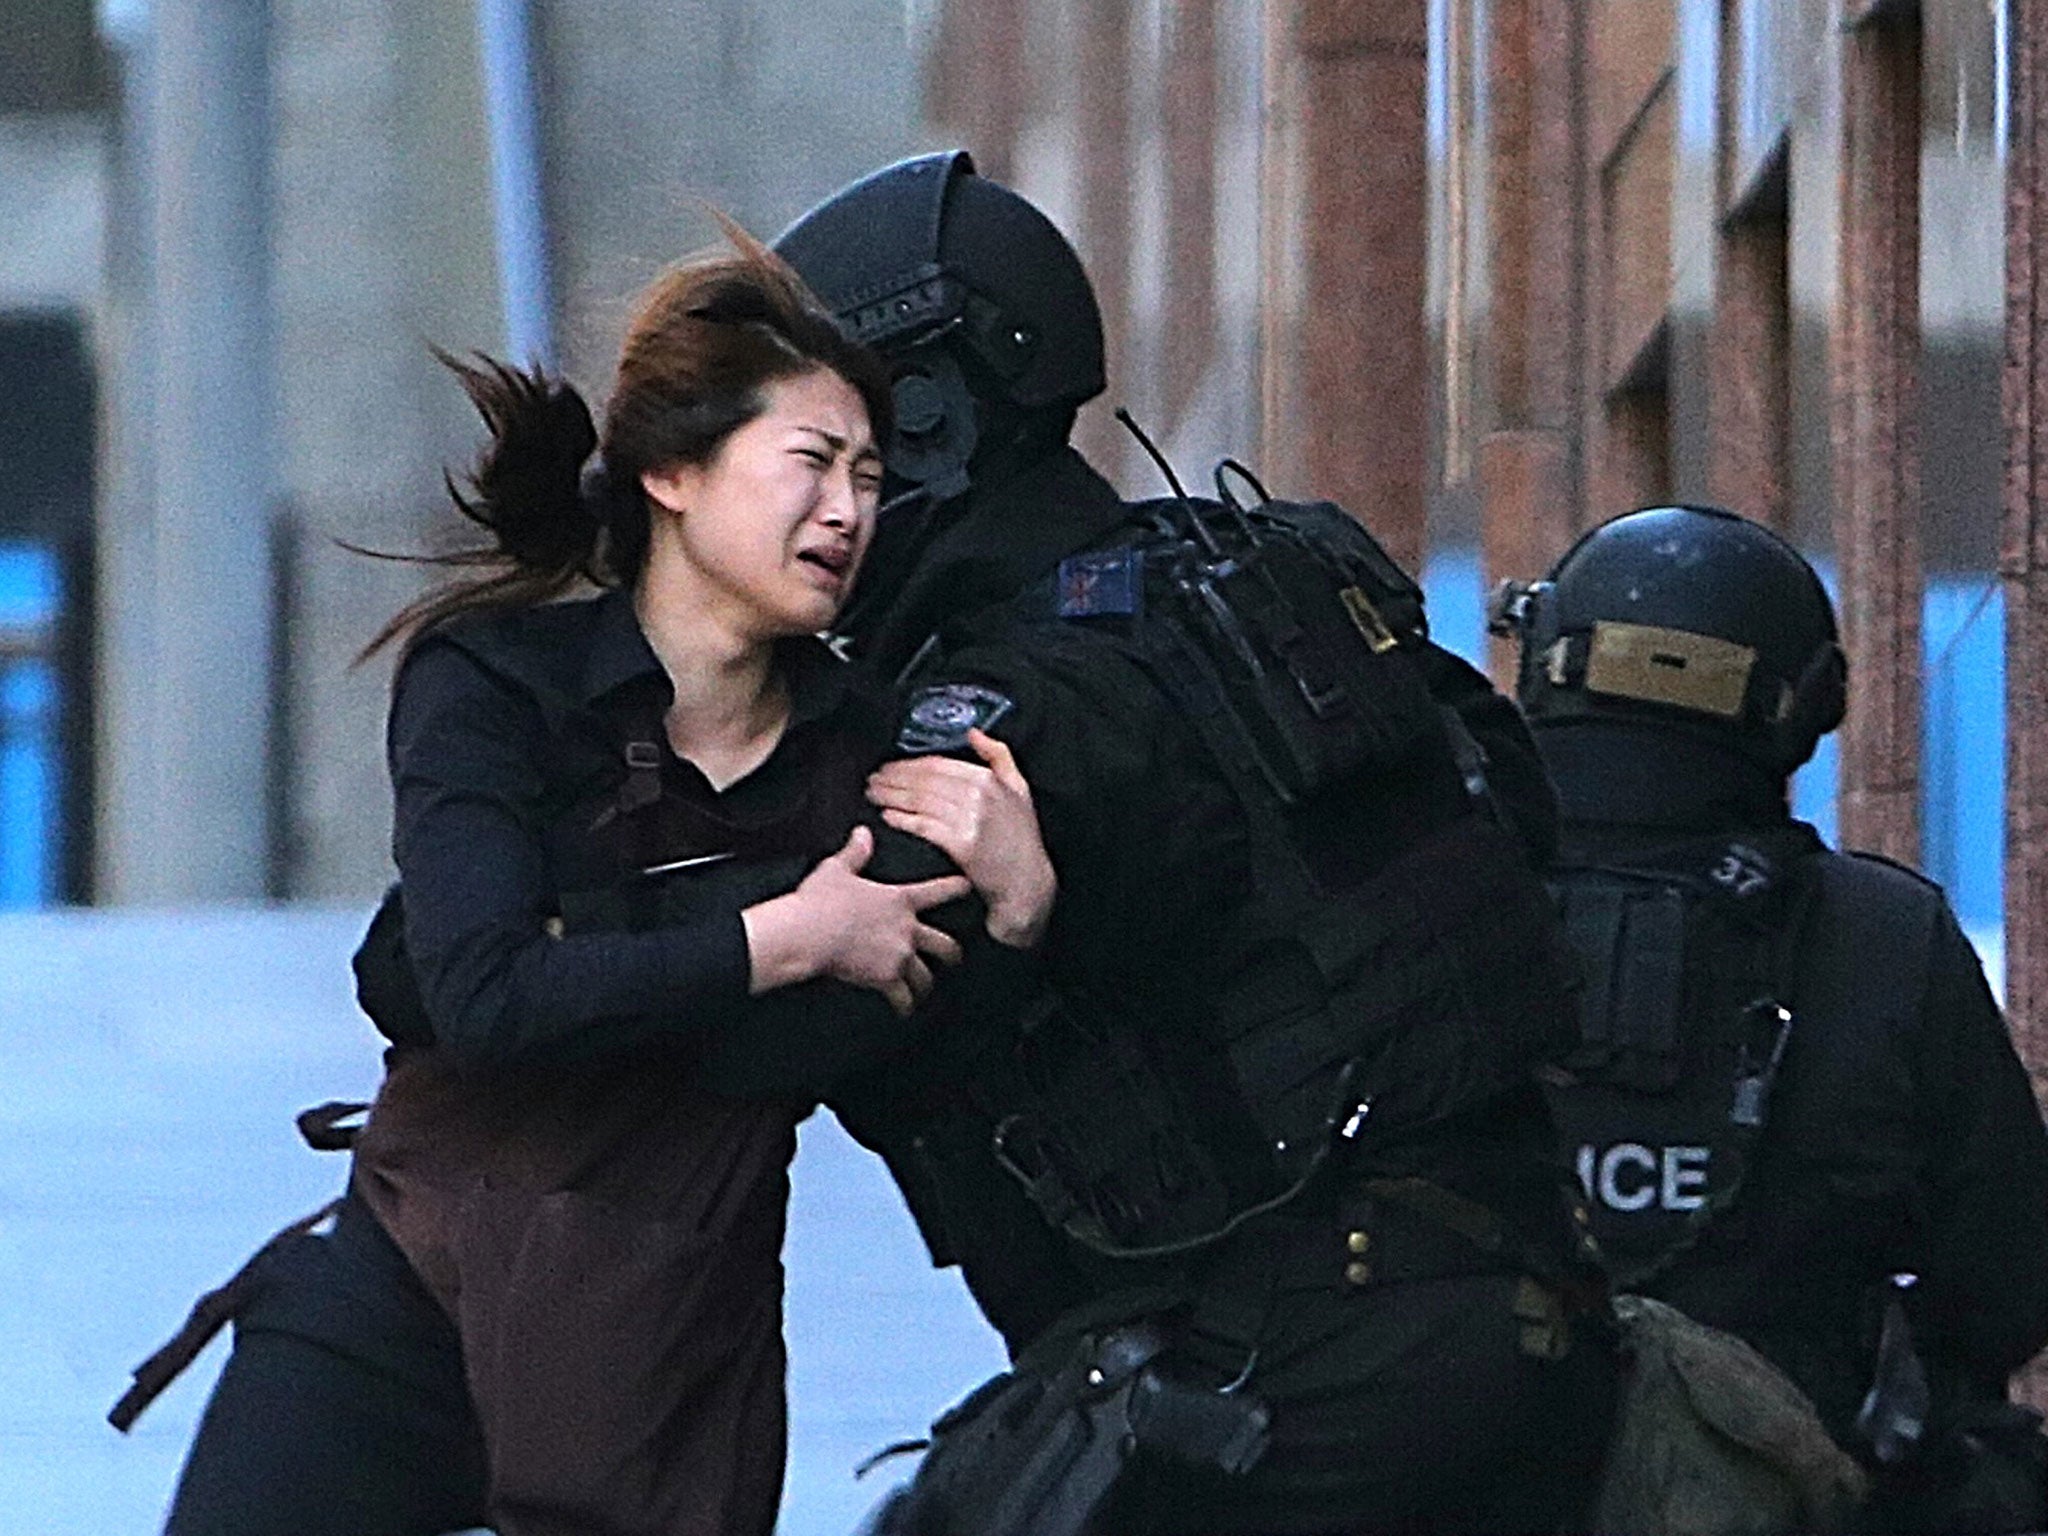 A hostage runs towards a police officer outside a cafe, where other hostages are being held in Sydney